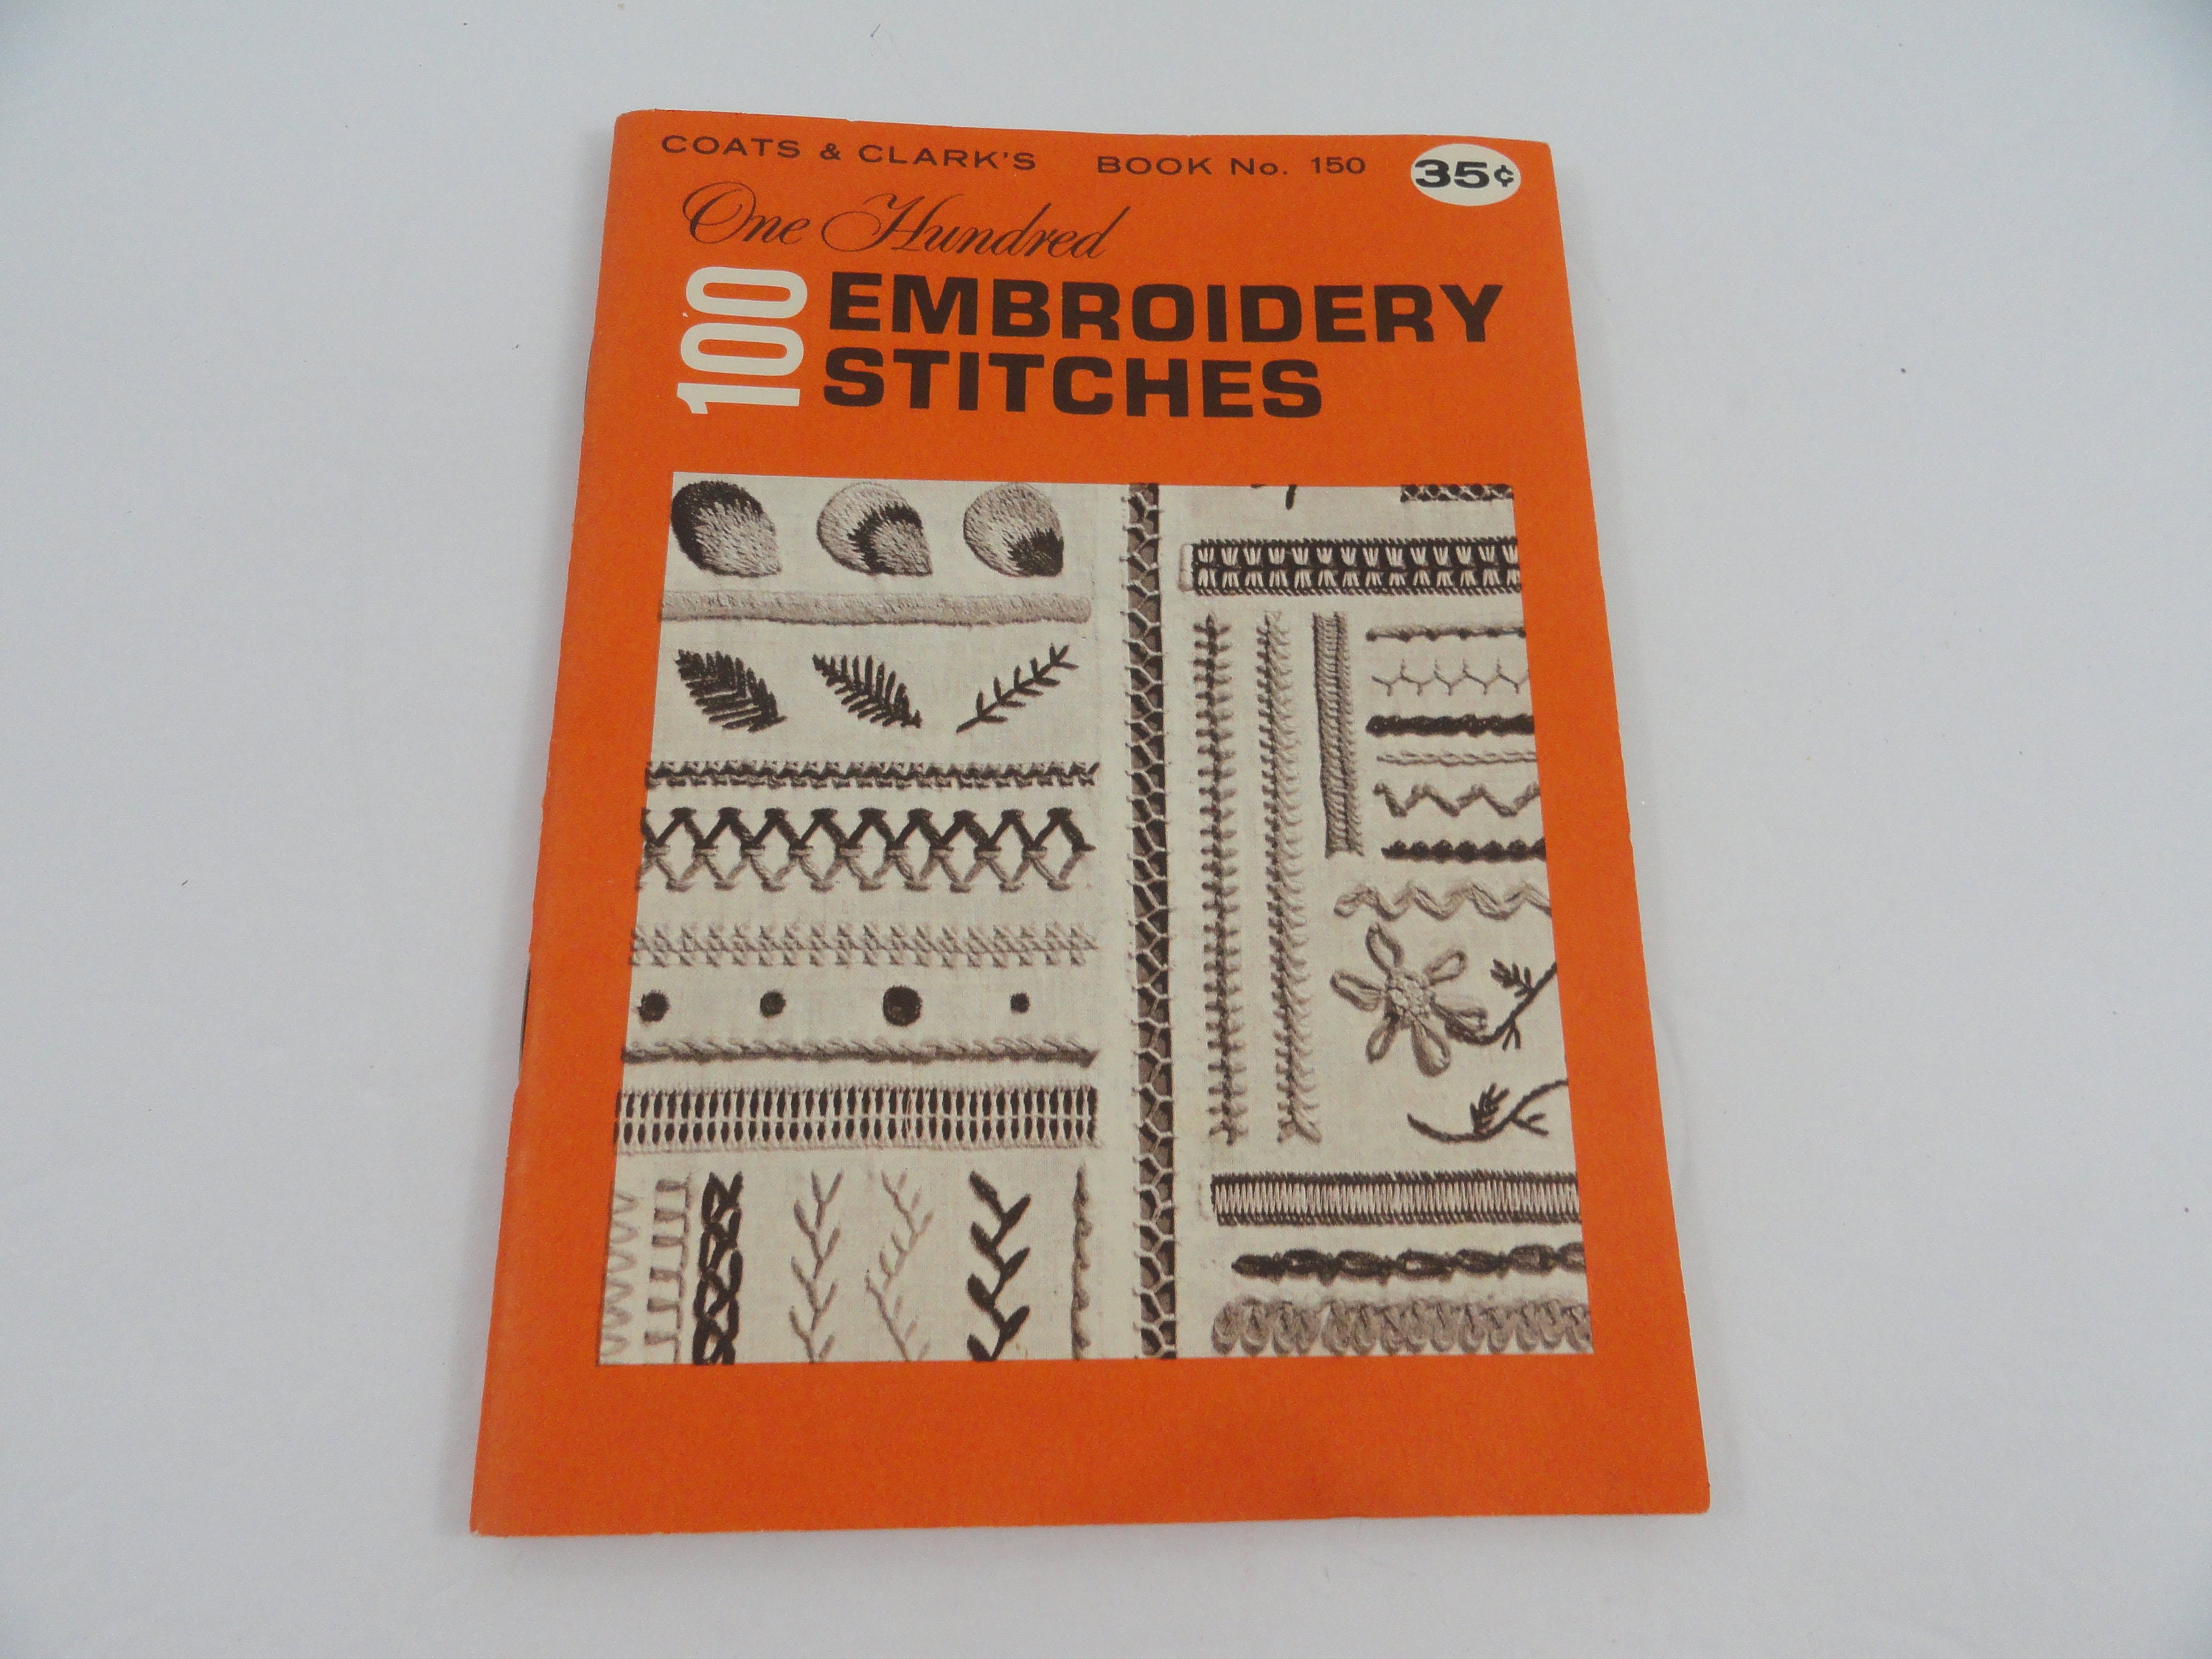 1964 Coats & Clark's Book No. 150, One Hundred Embroidery Stitches (150)